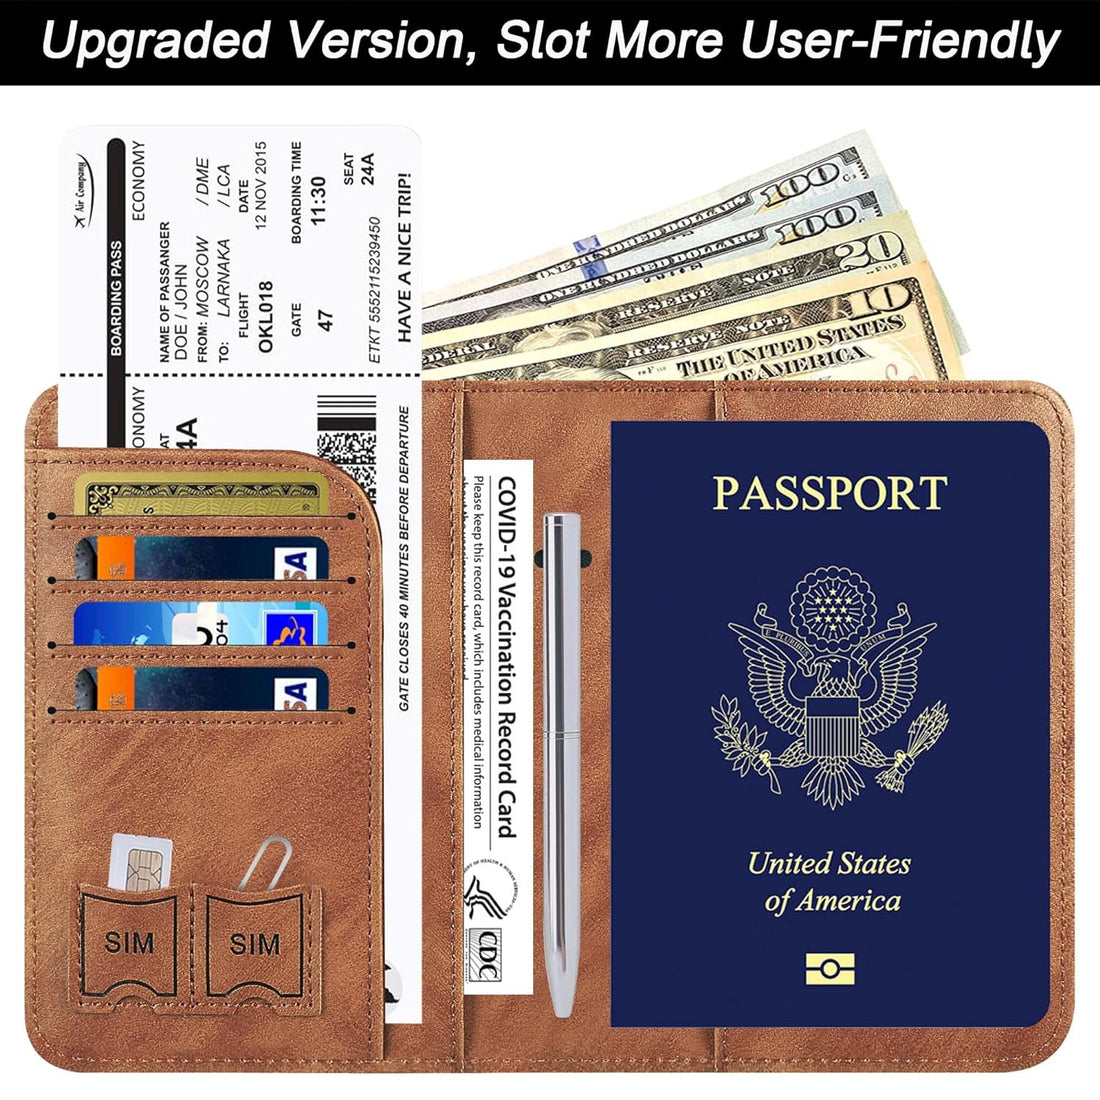 Passport and Vaccine Card Holder Combo Passport Holder Cover Wallet Case Leather Travel Wallet Rfid Blocking for Men Women, 116#Brown, Upgraded